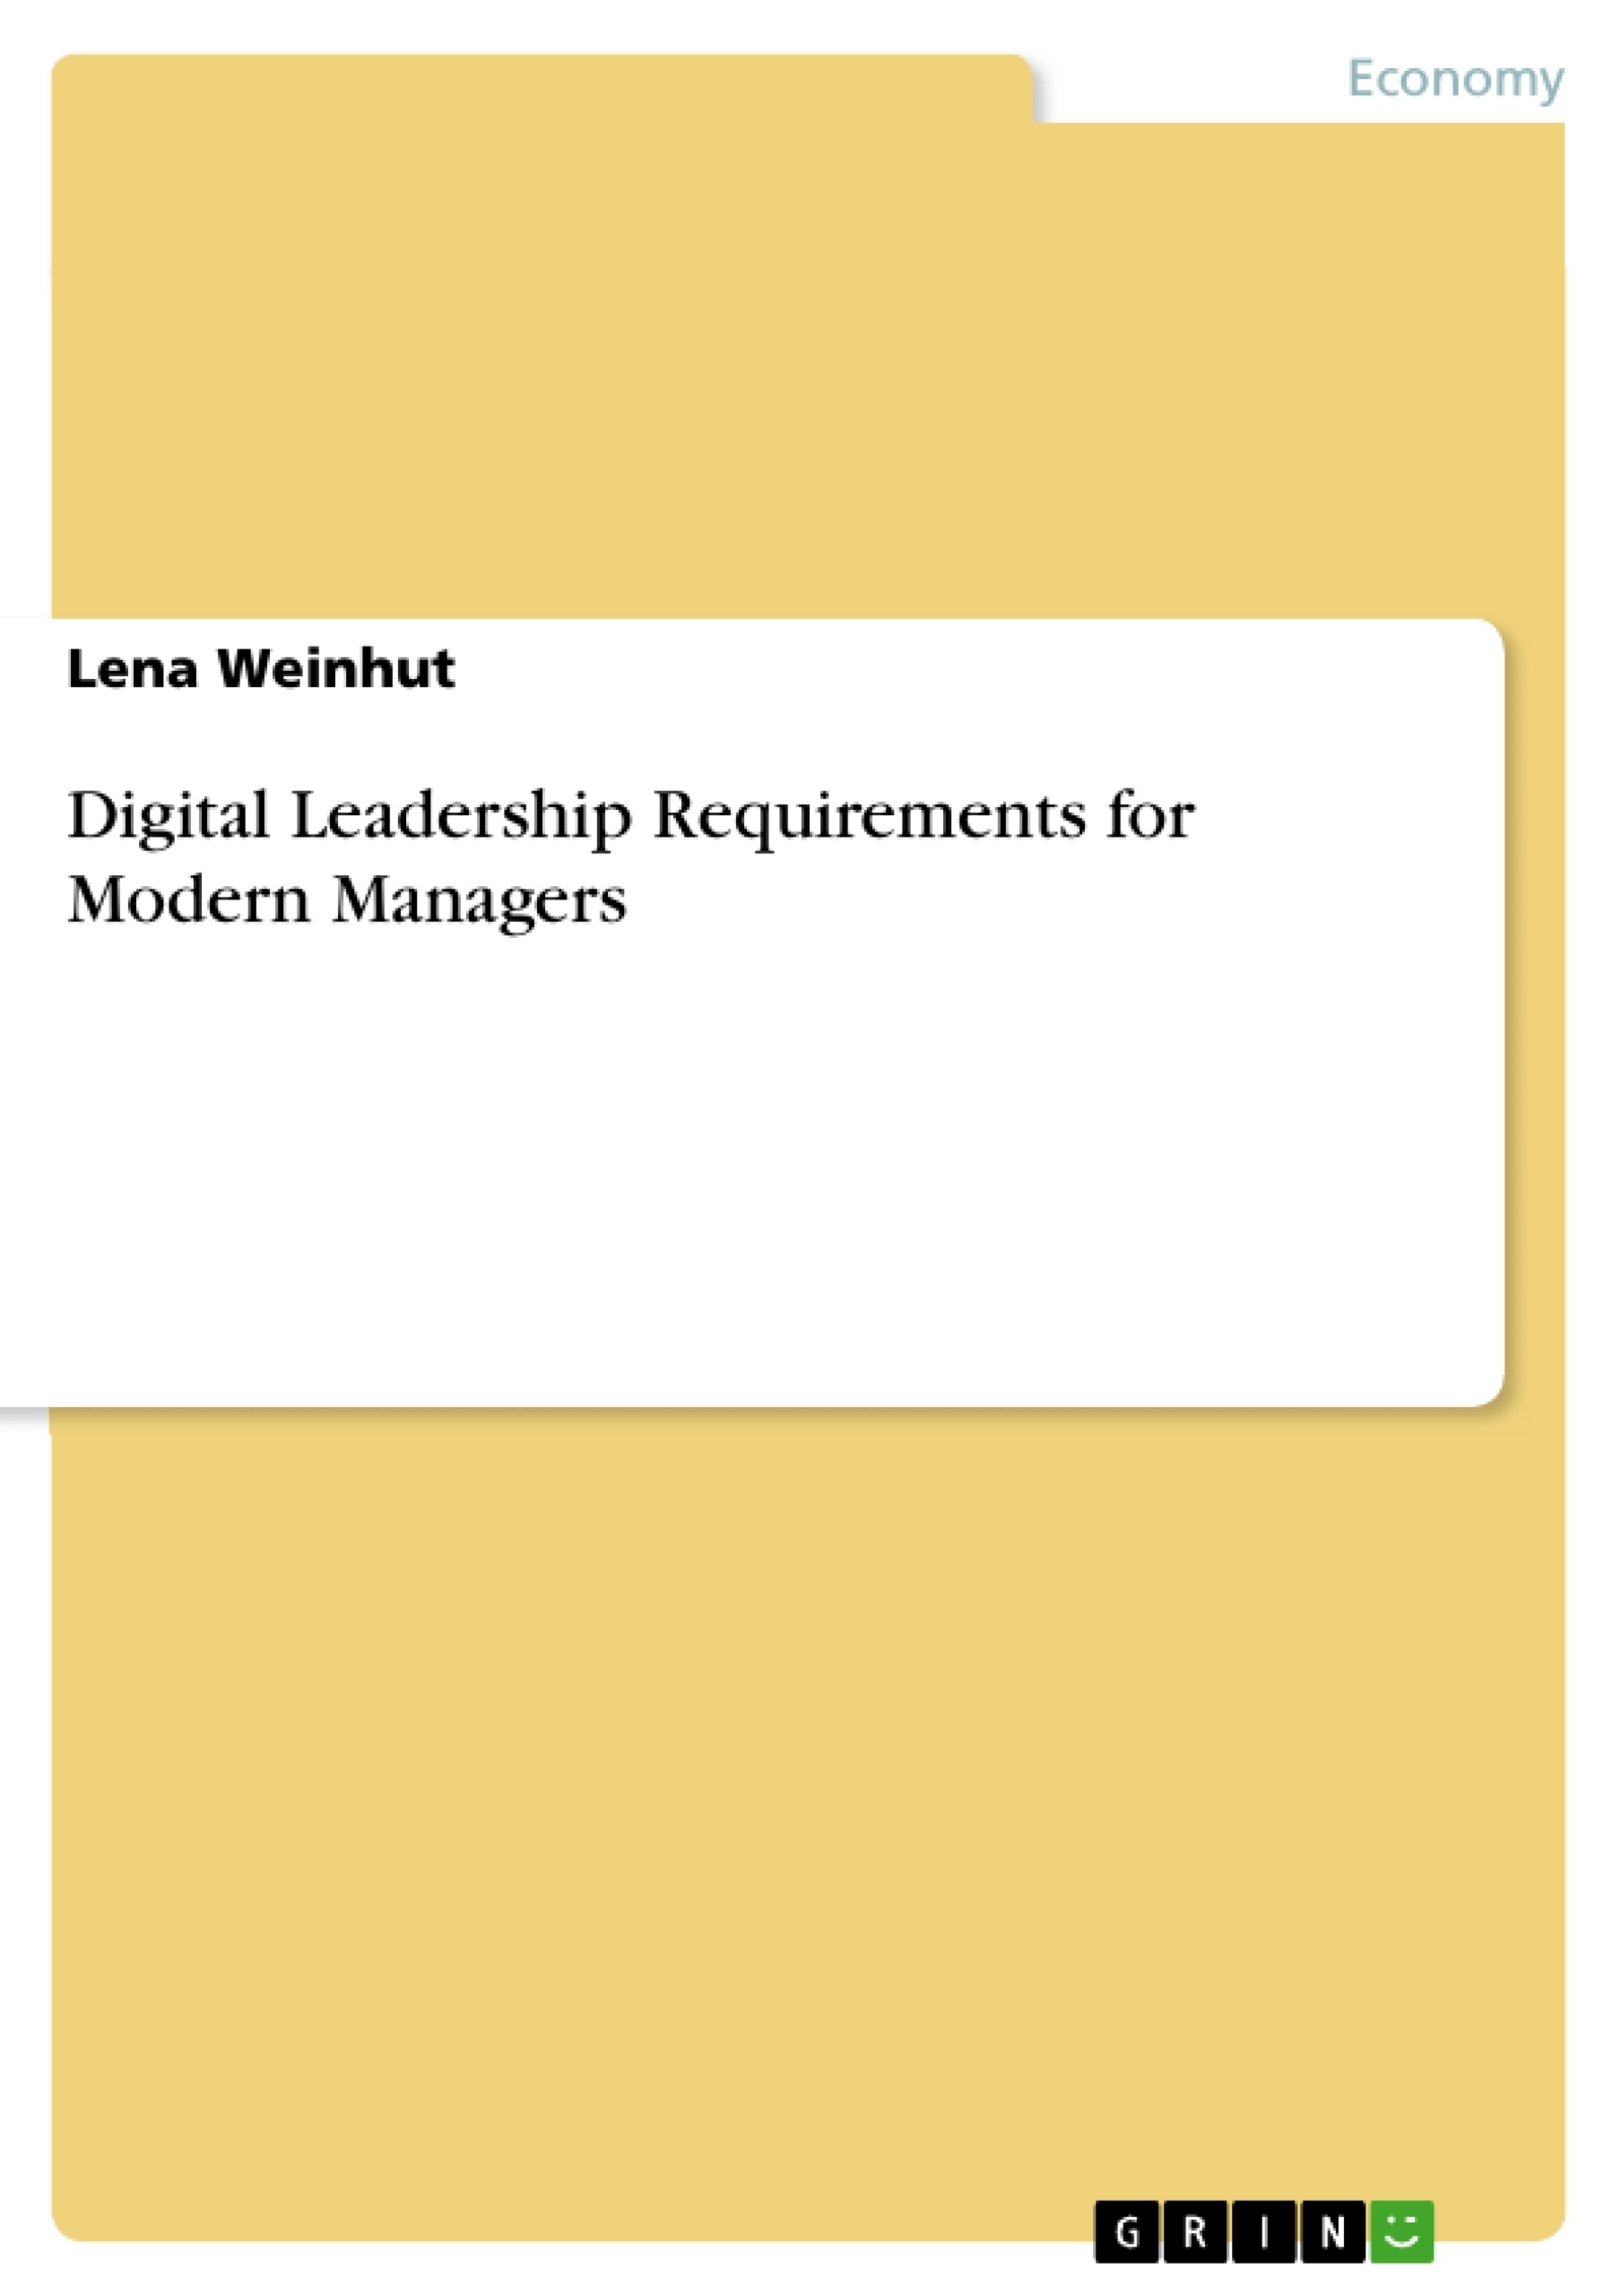 Title: Digital Leadership Requirements for Modern Managers